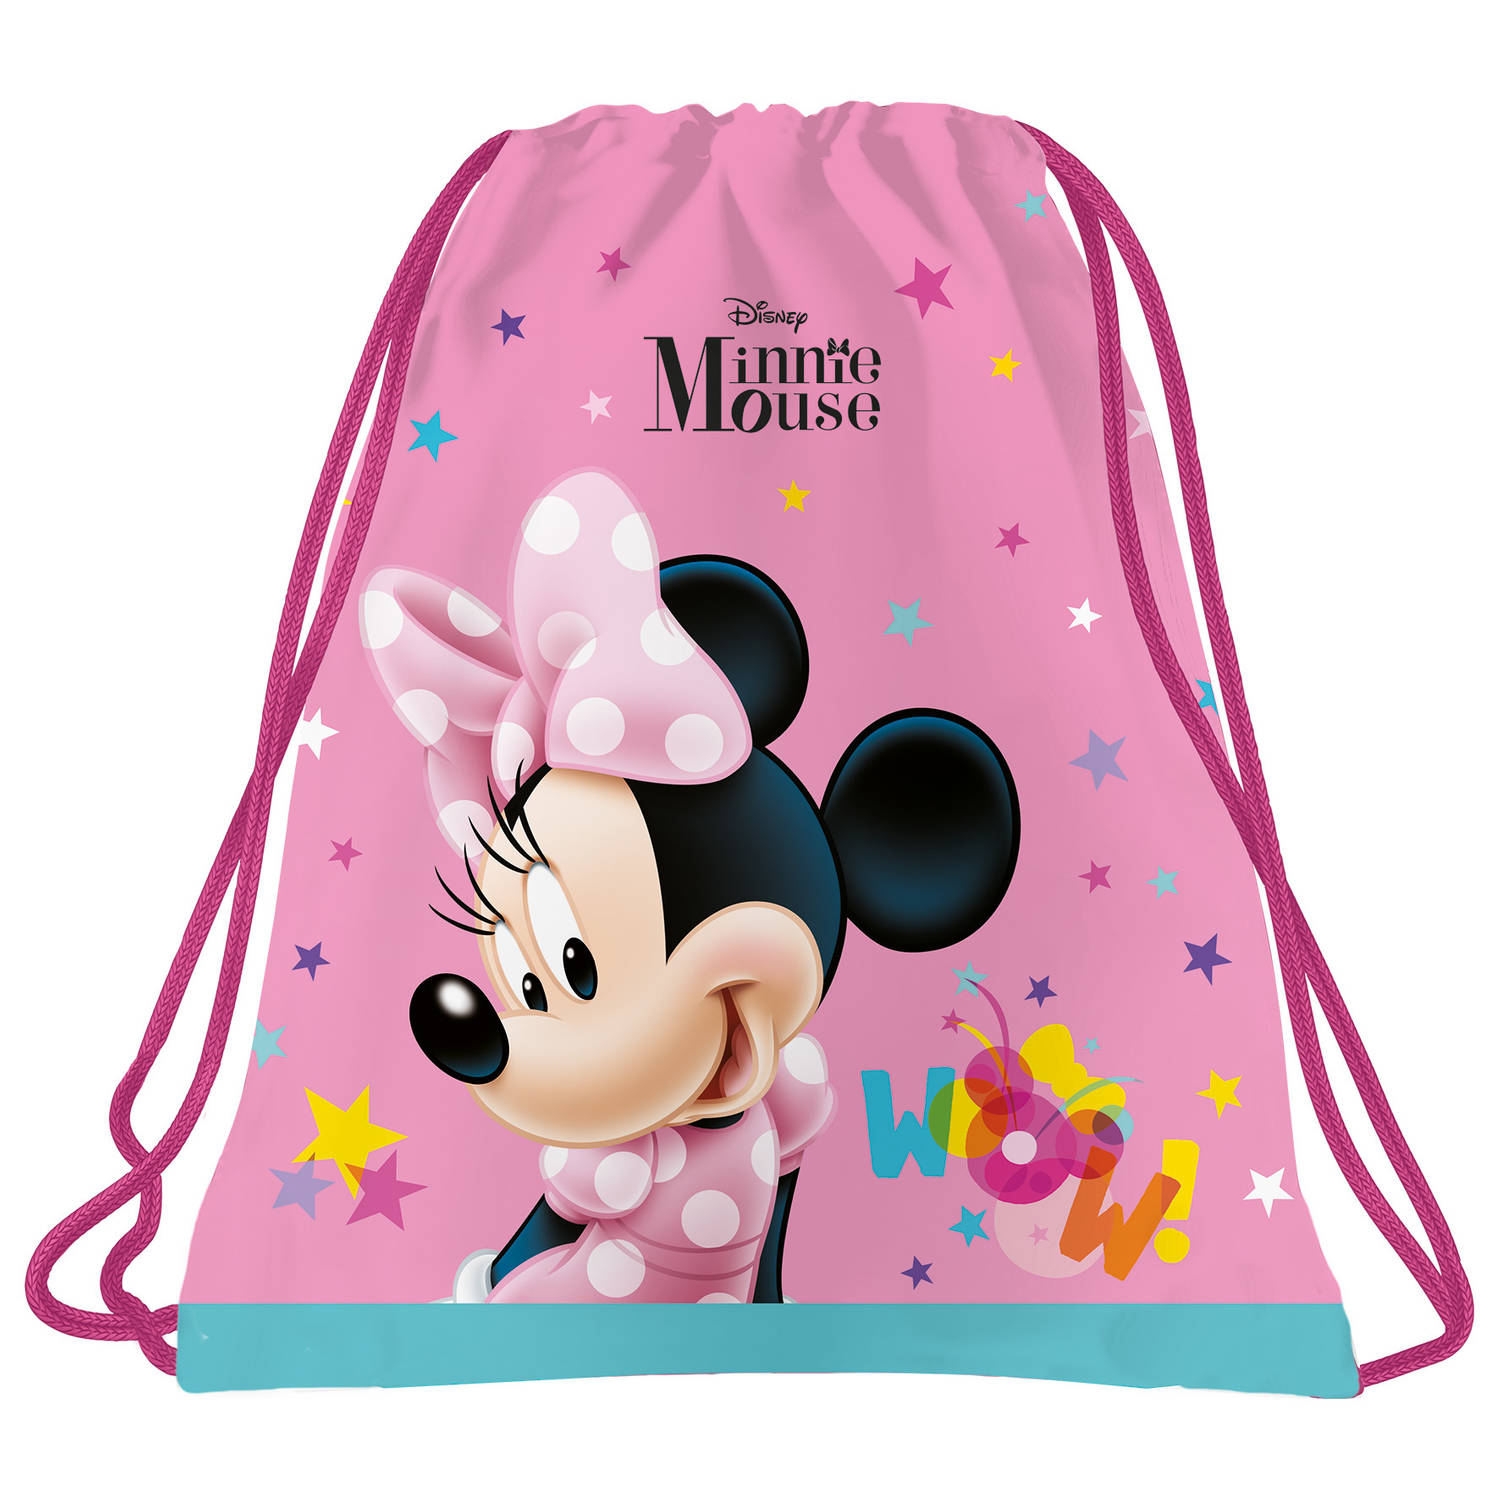 Disney Minnie Mouse Gymbag Wow - 41 x 35 cm - Polyester